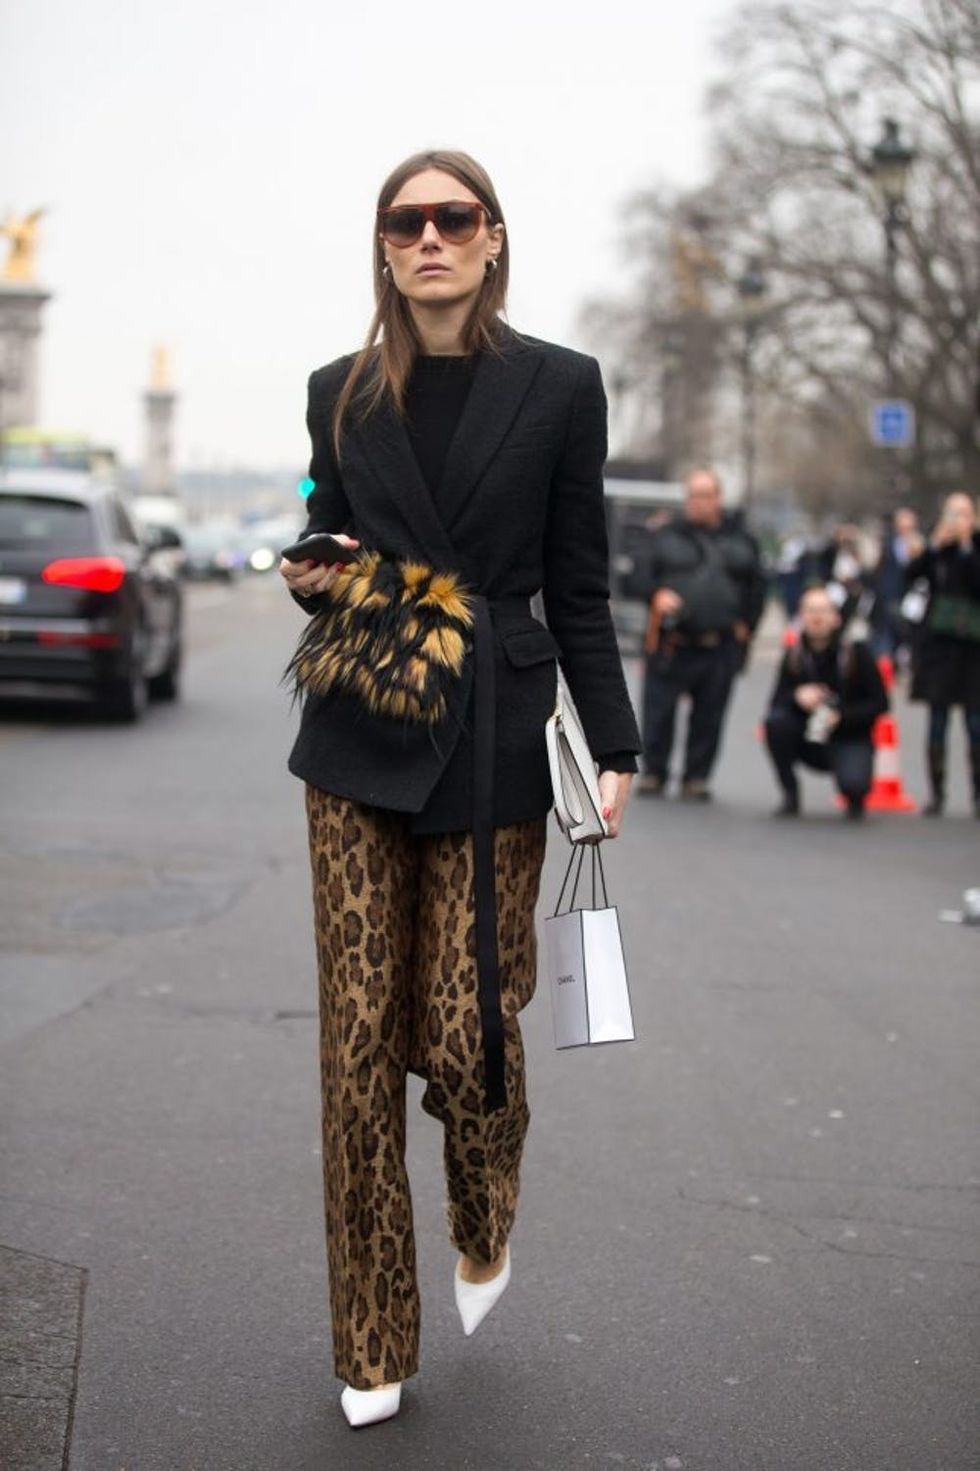 The 25 Most Original Street Style Outfit Ideas from Paris - Brit + Co